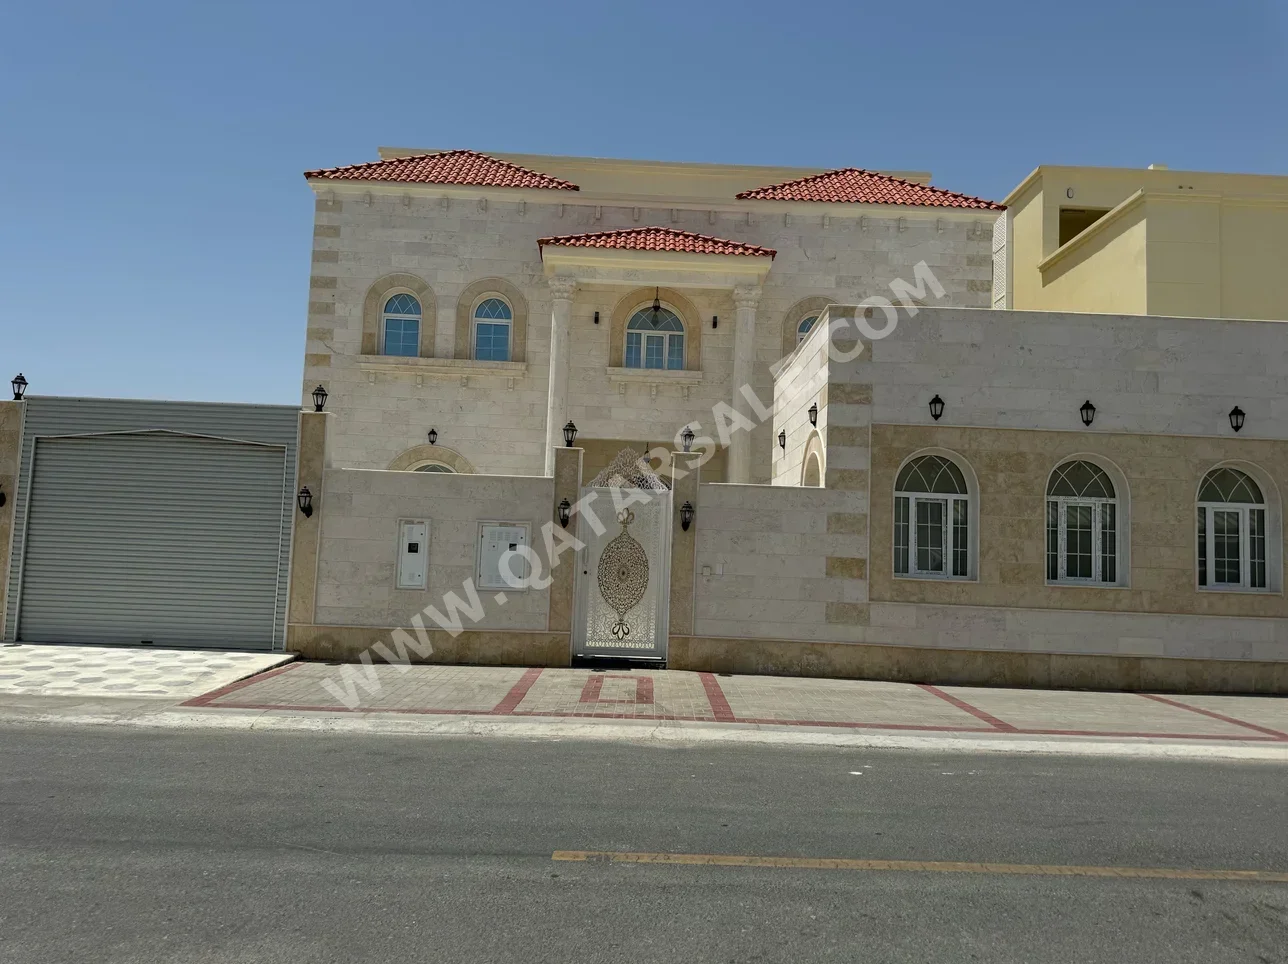 Family Residential  - Not Furnished  - Al Daayen  - Umm Qarn  - 7 Bedrooms  - Includes Water & Electricity